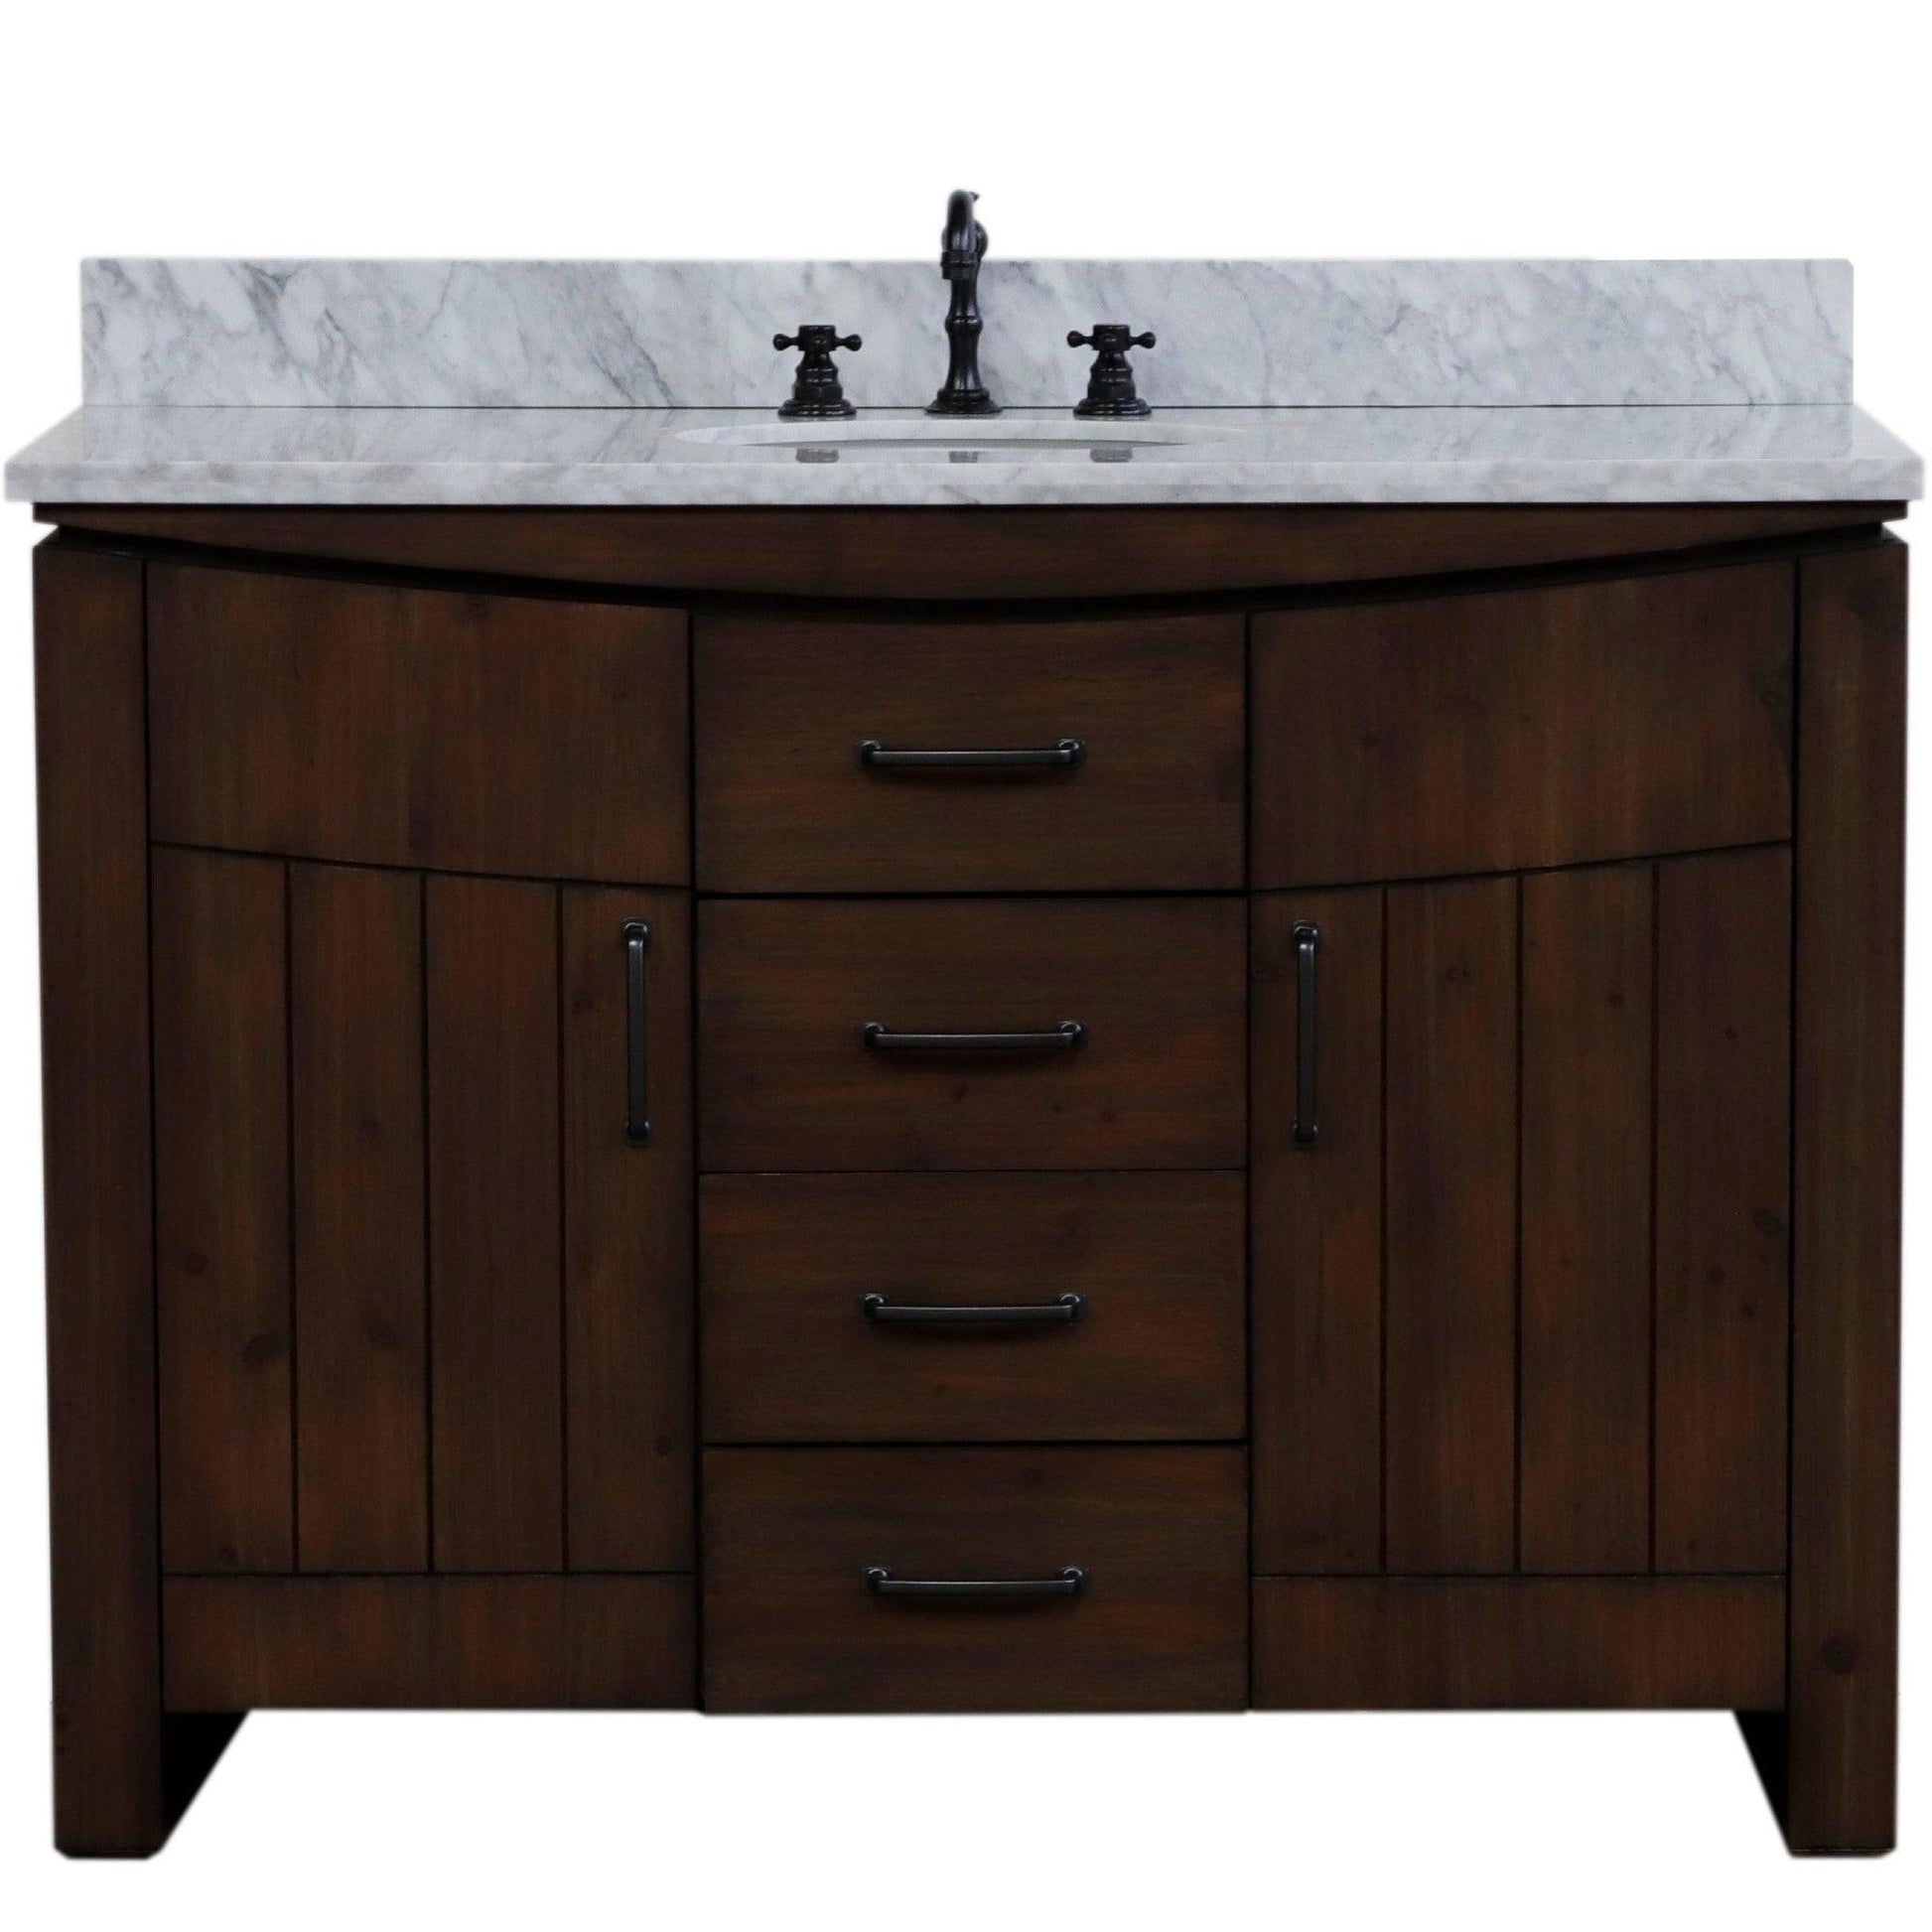 Bellaterra Home 48" 2-Door 3-Drawer Rustic Wood Freestanding Vanity Set With Ceramic Center Undermount Oval Sink and White Marble Top